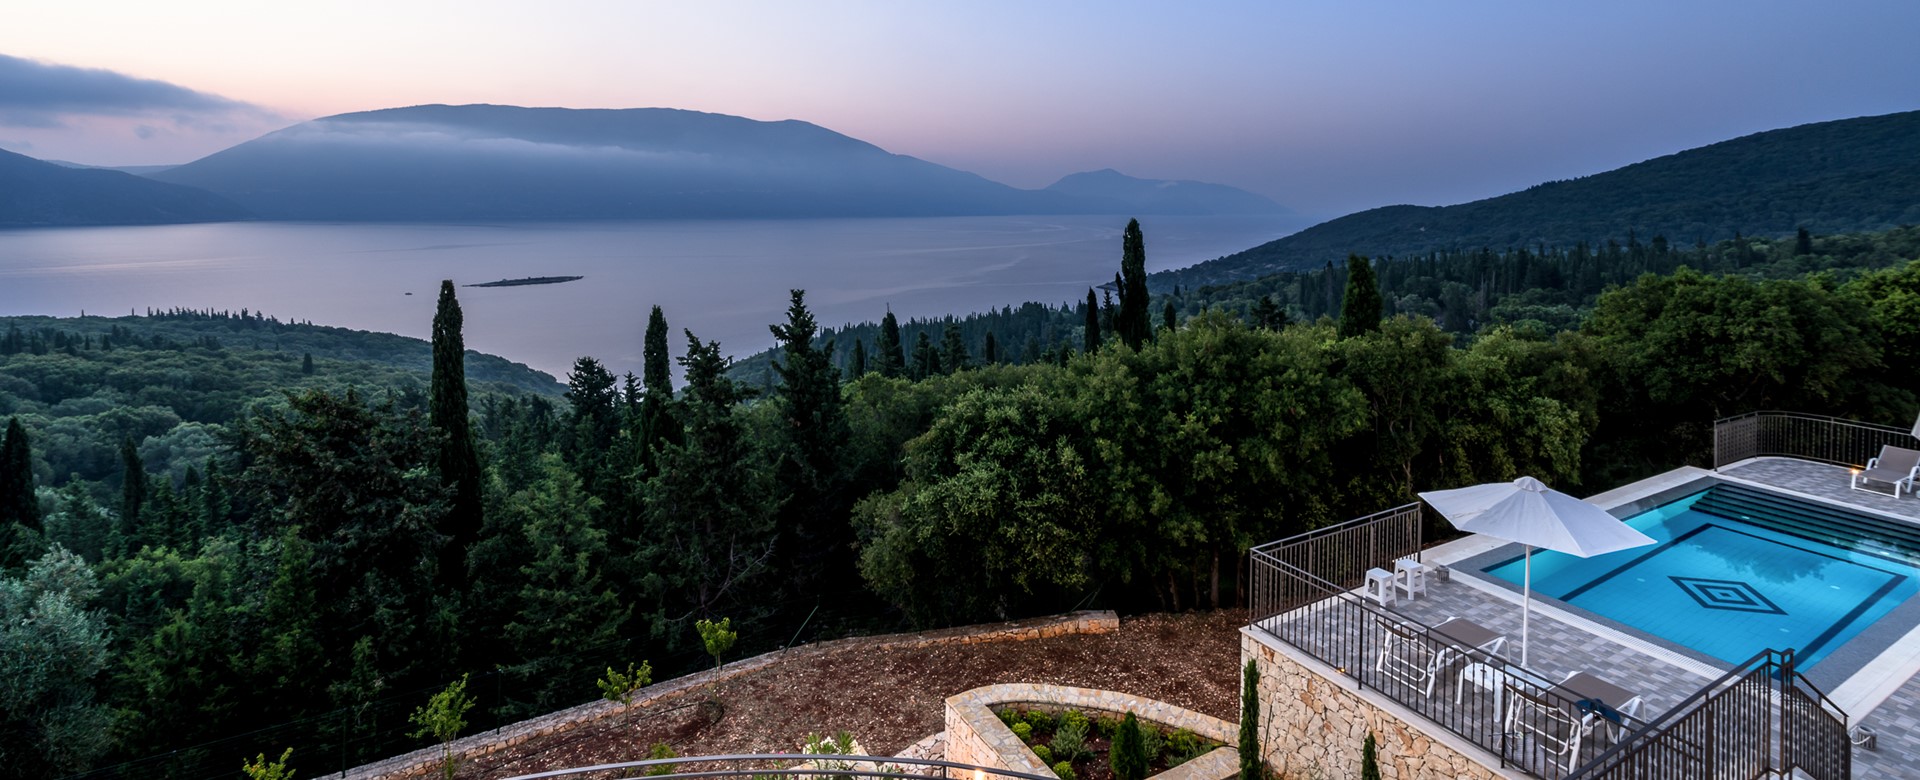 Uninterrupted views across sea to island of Ithaca from every terrace at Villa Gionis Fiscardo, Kefalonia, Greek Islands